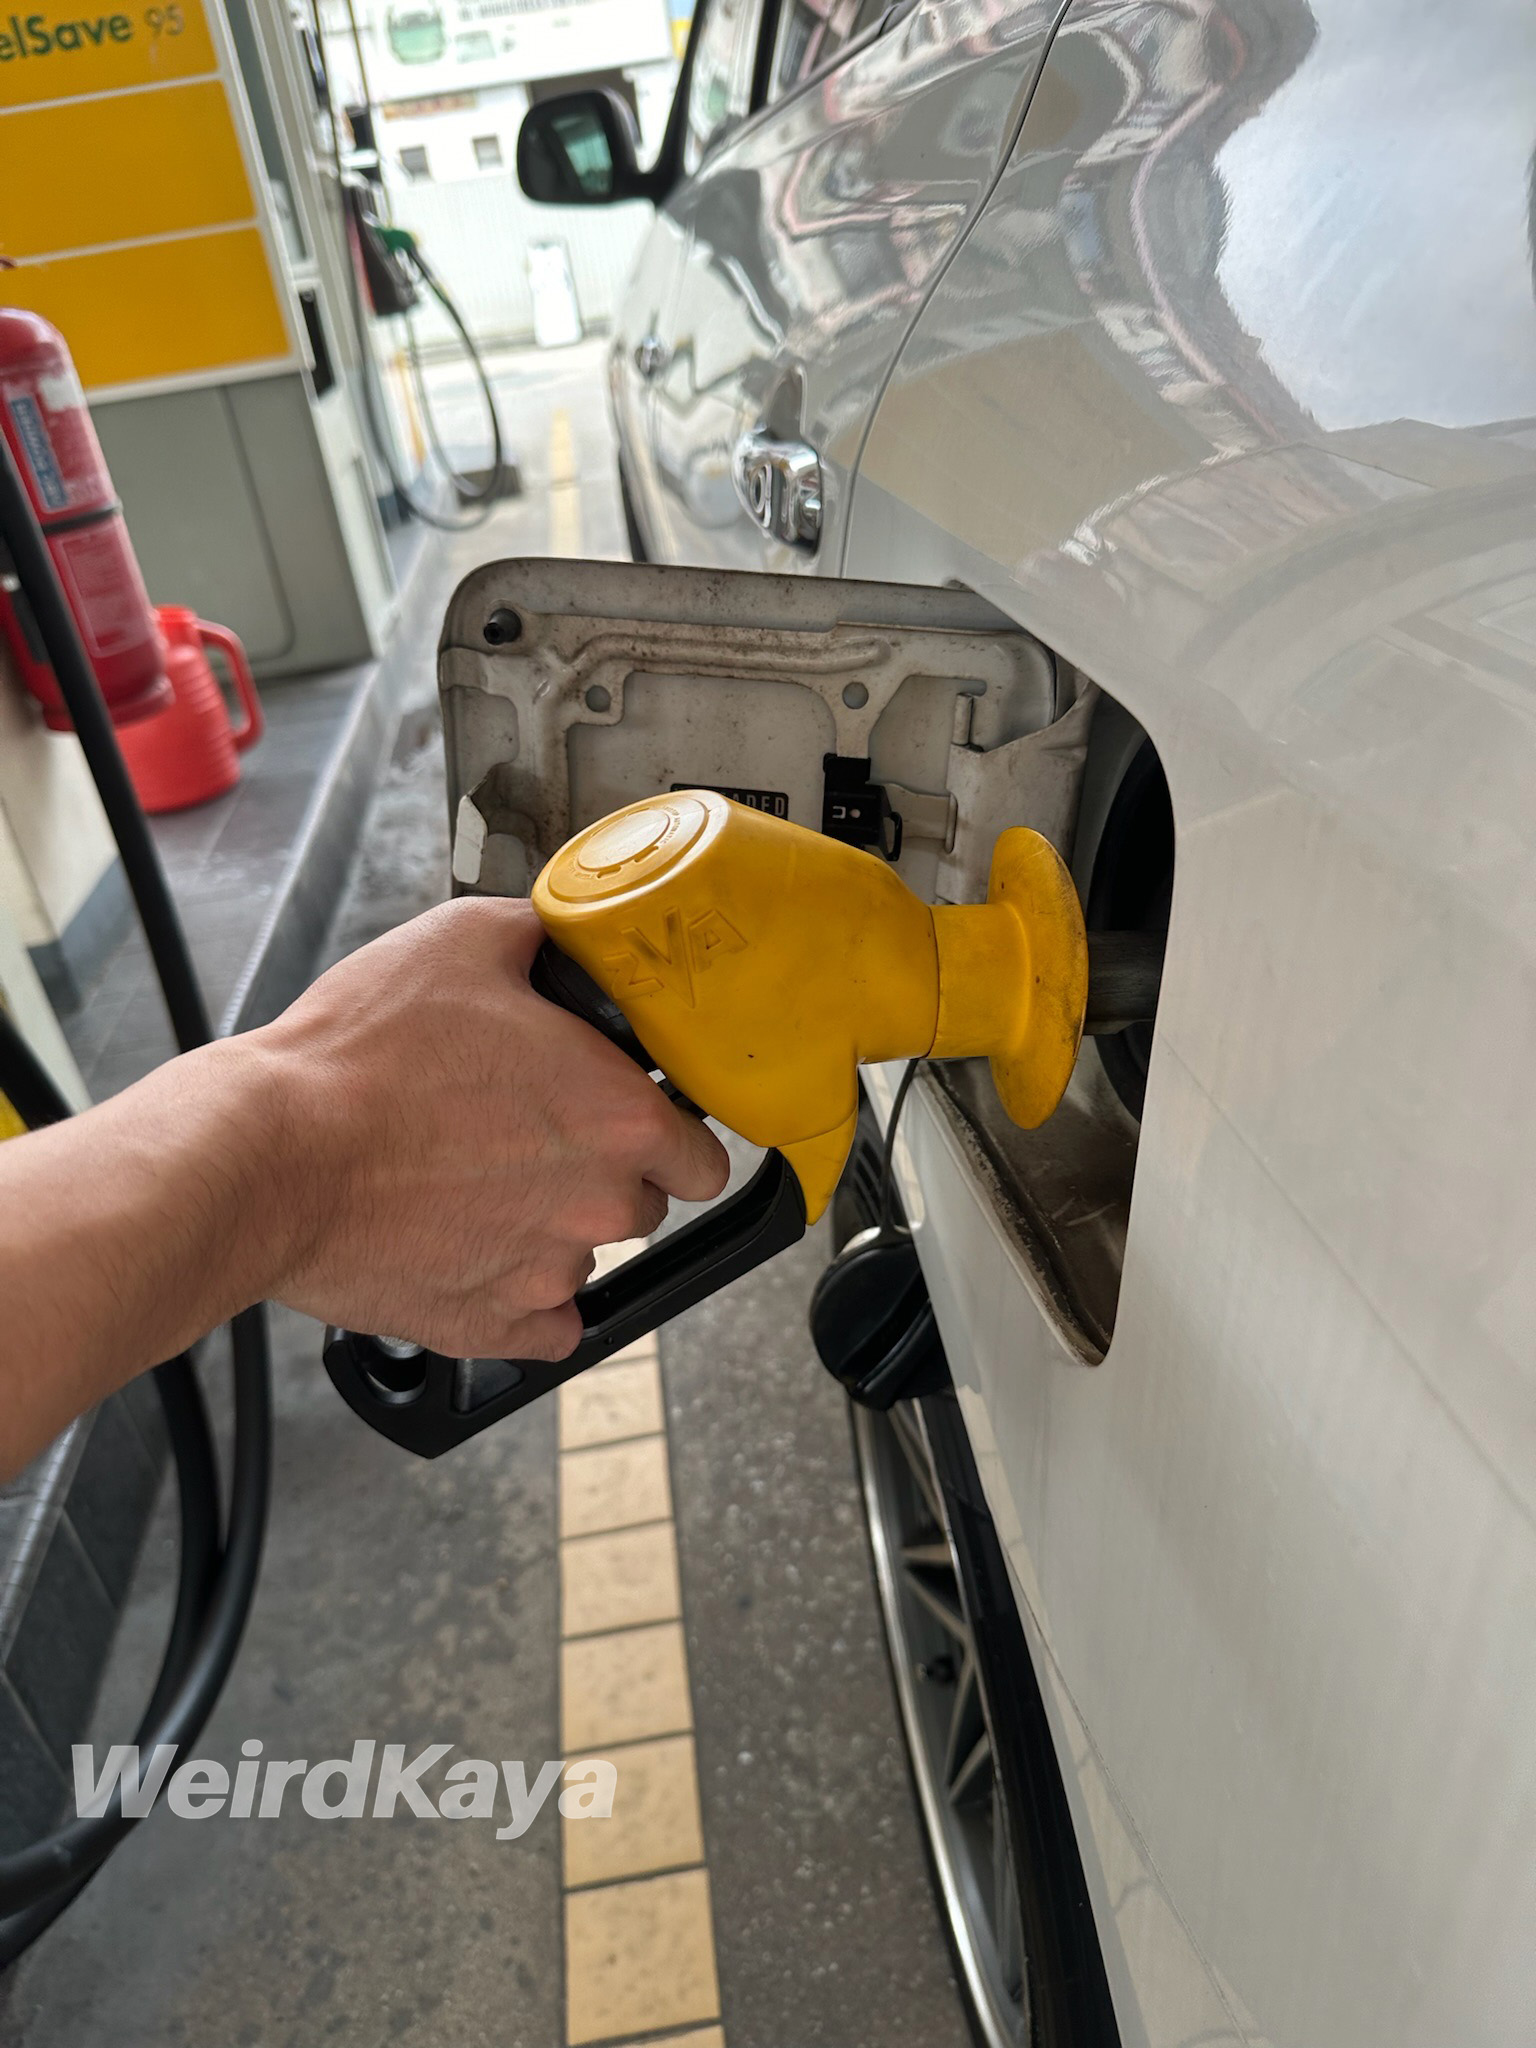 M'sian govt to reduce petrol subsidies this year, says economy minister  | weirdkaya